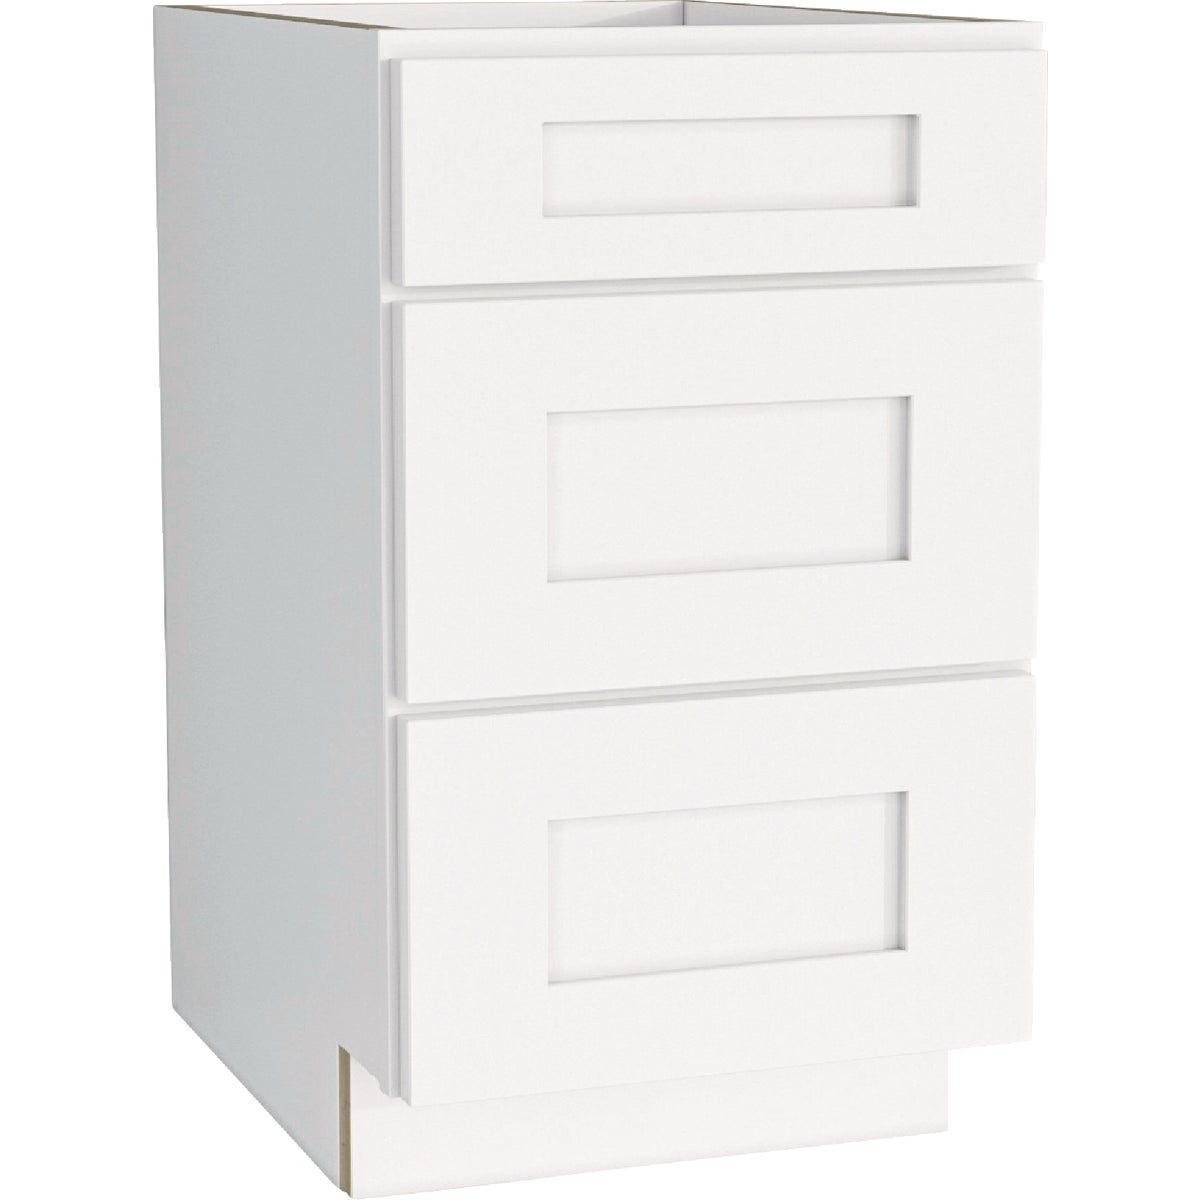 CraftMark Plymouth Shaker 18 In. W x 24 In. D x 34.5 In H Ready To Assemble White Drawer Base Kitchen Cabinet